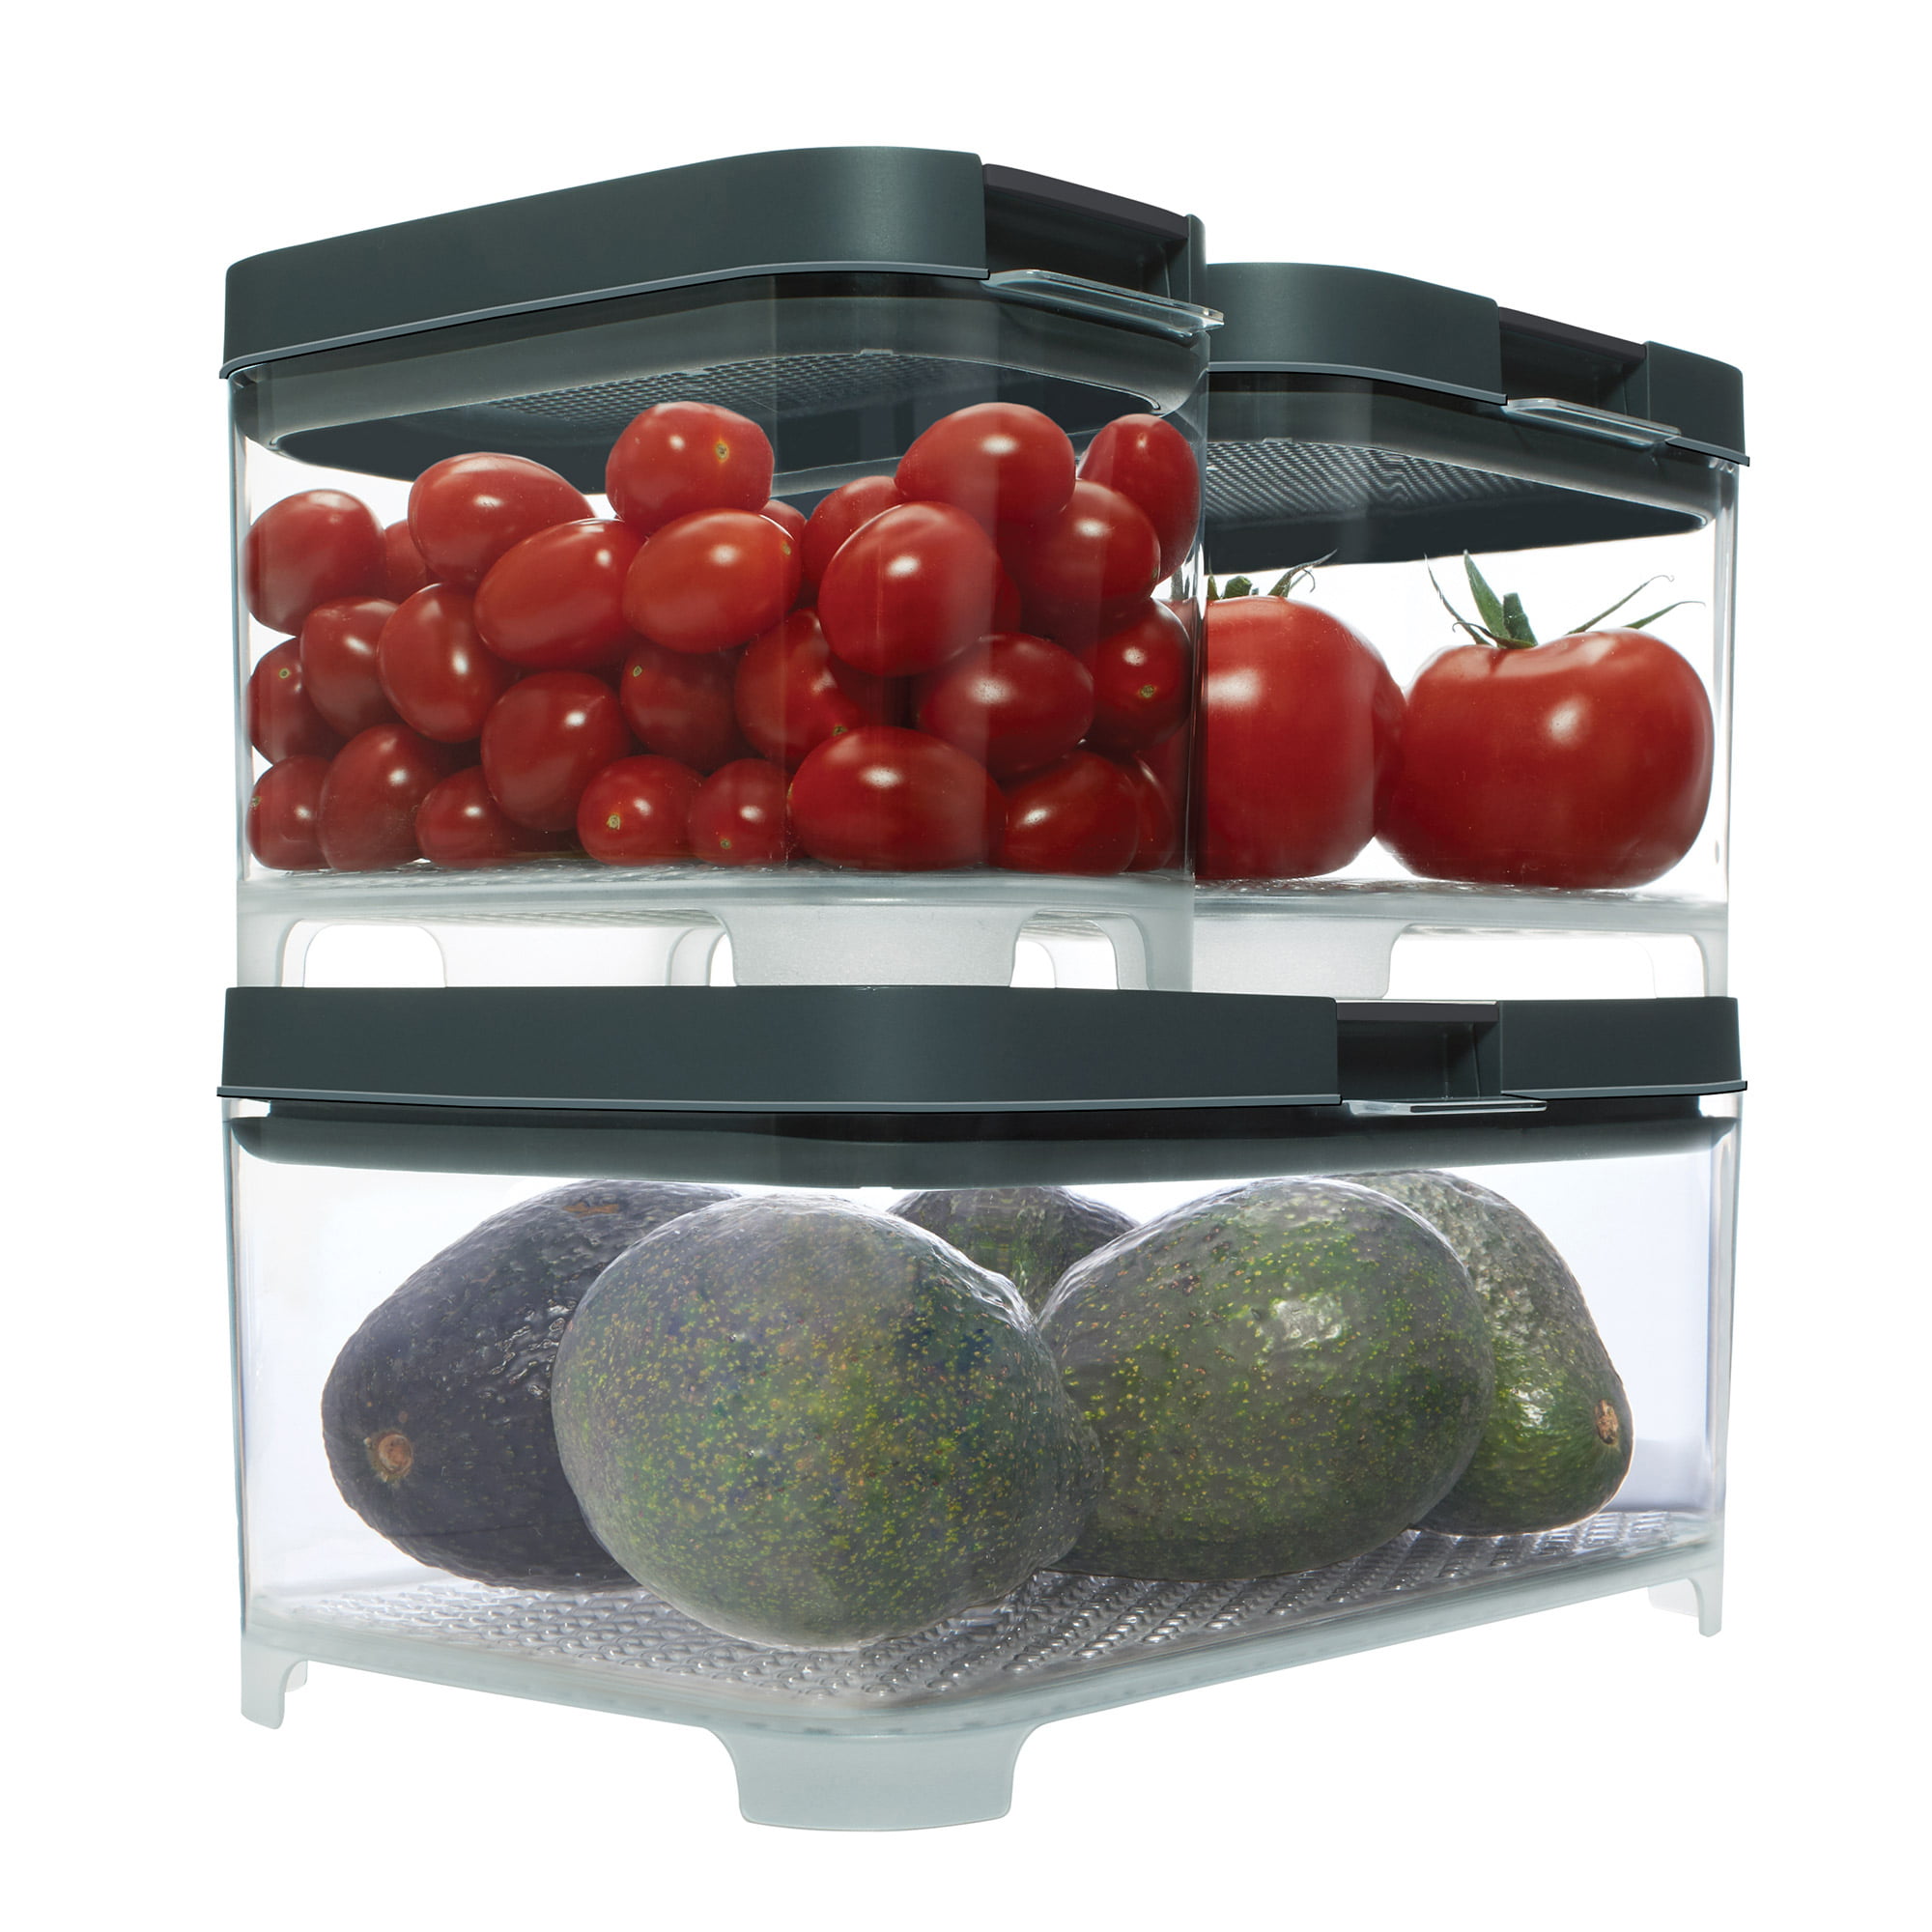 Rubbermaid FreshWorks Produce Saver Large Square Container - Clear/Green,  11.1 c - King Soopers